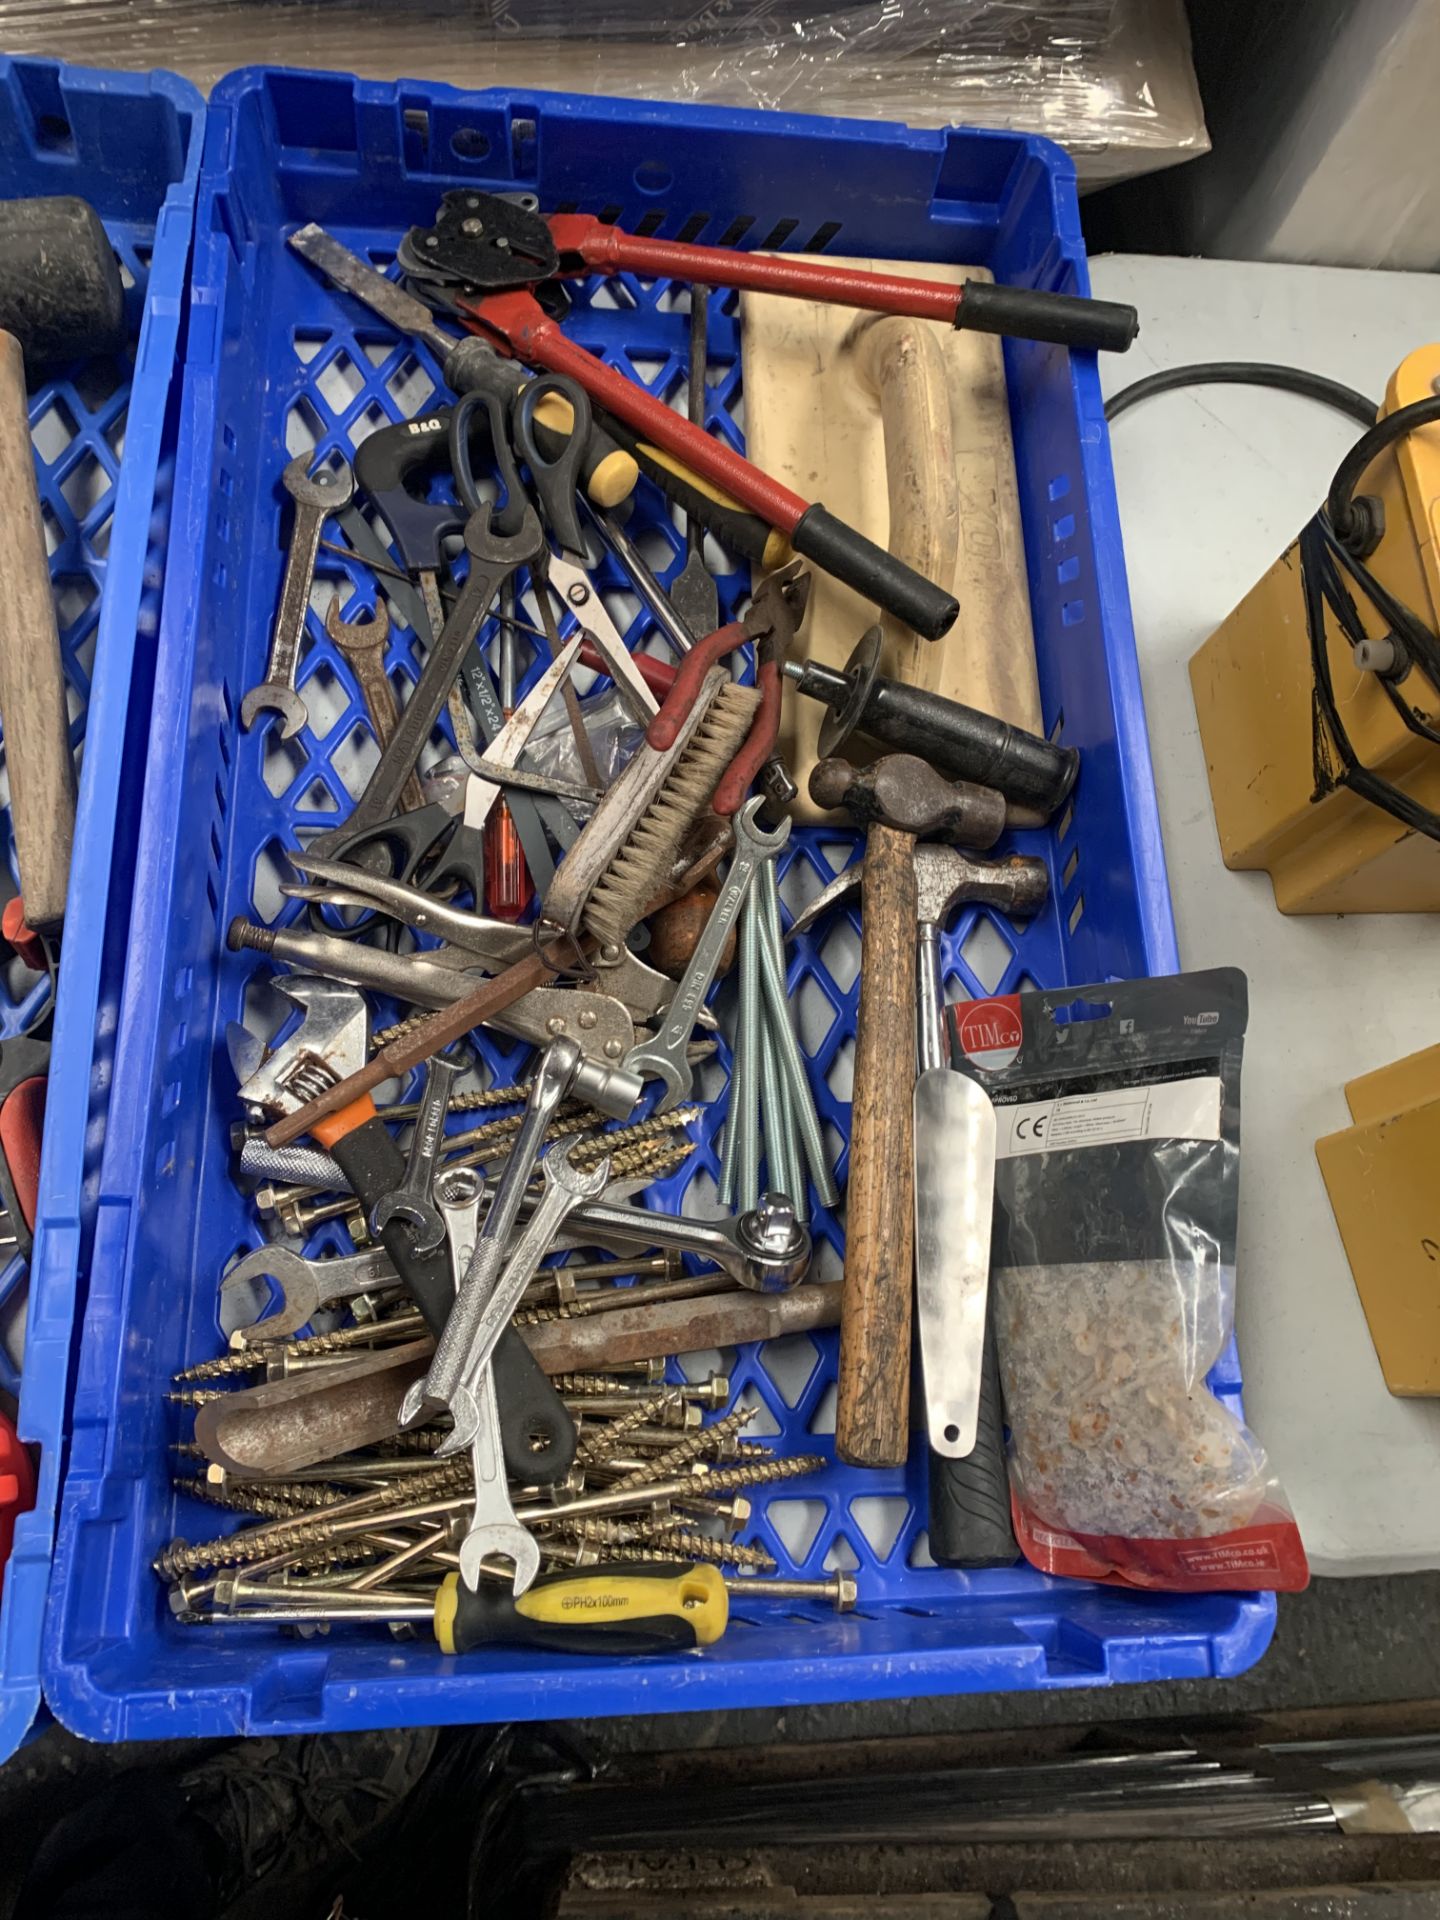 CONTENTS OF TRAY HAND TOOLS INC SPANNERS ETC